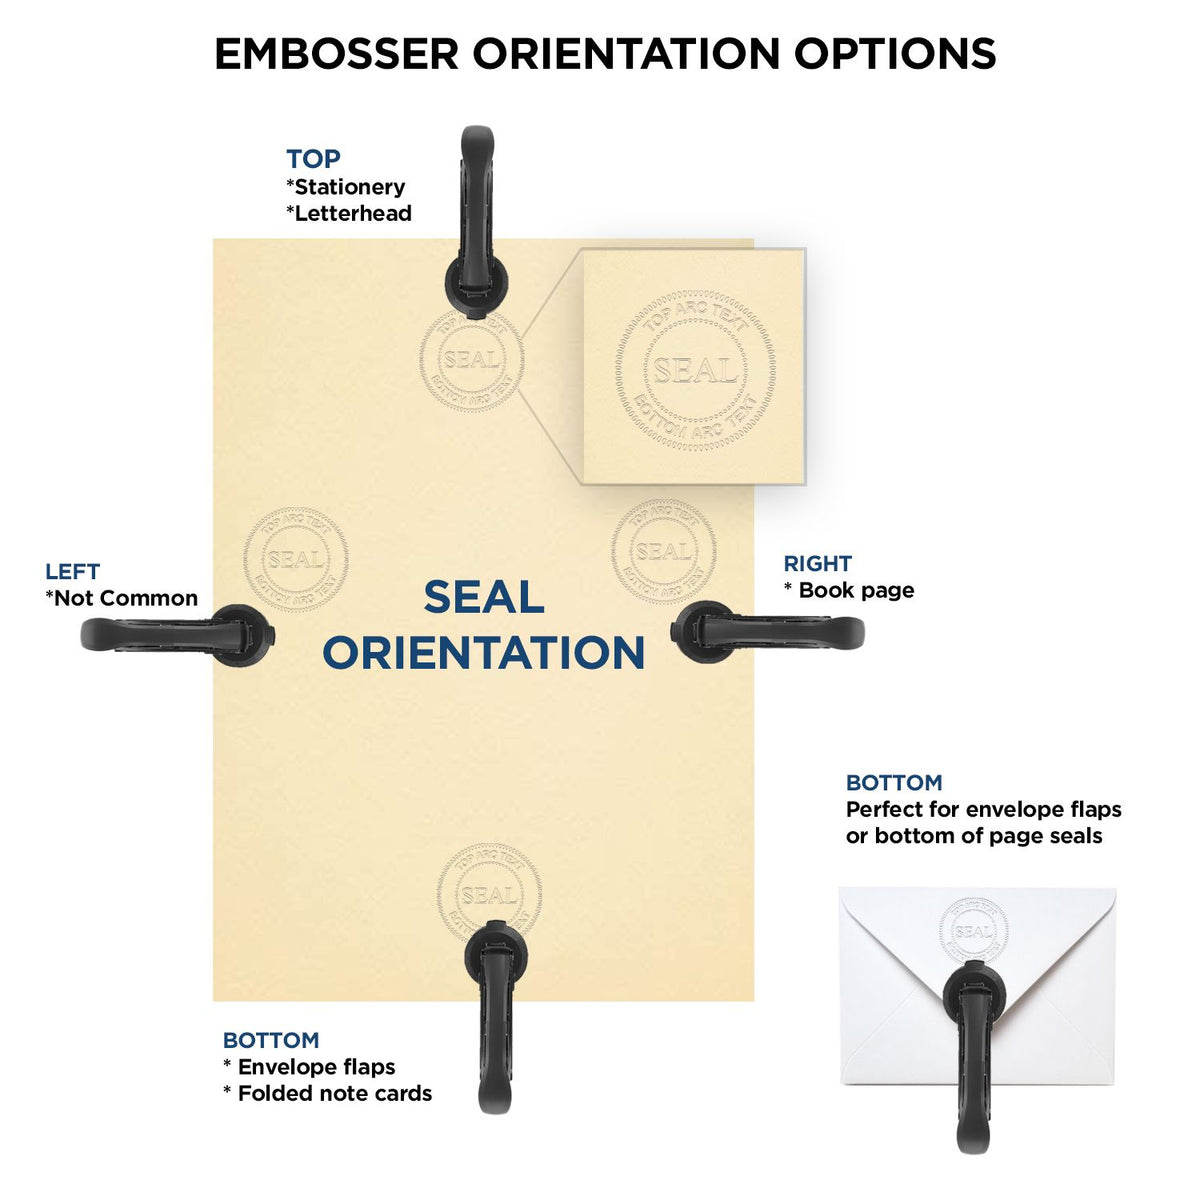 An infographic for the New Hampshire Desk Architect Embossing Seal showing embosser orientation, this is showing examples of a top, bottom, right and left insert.